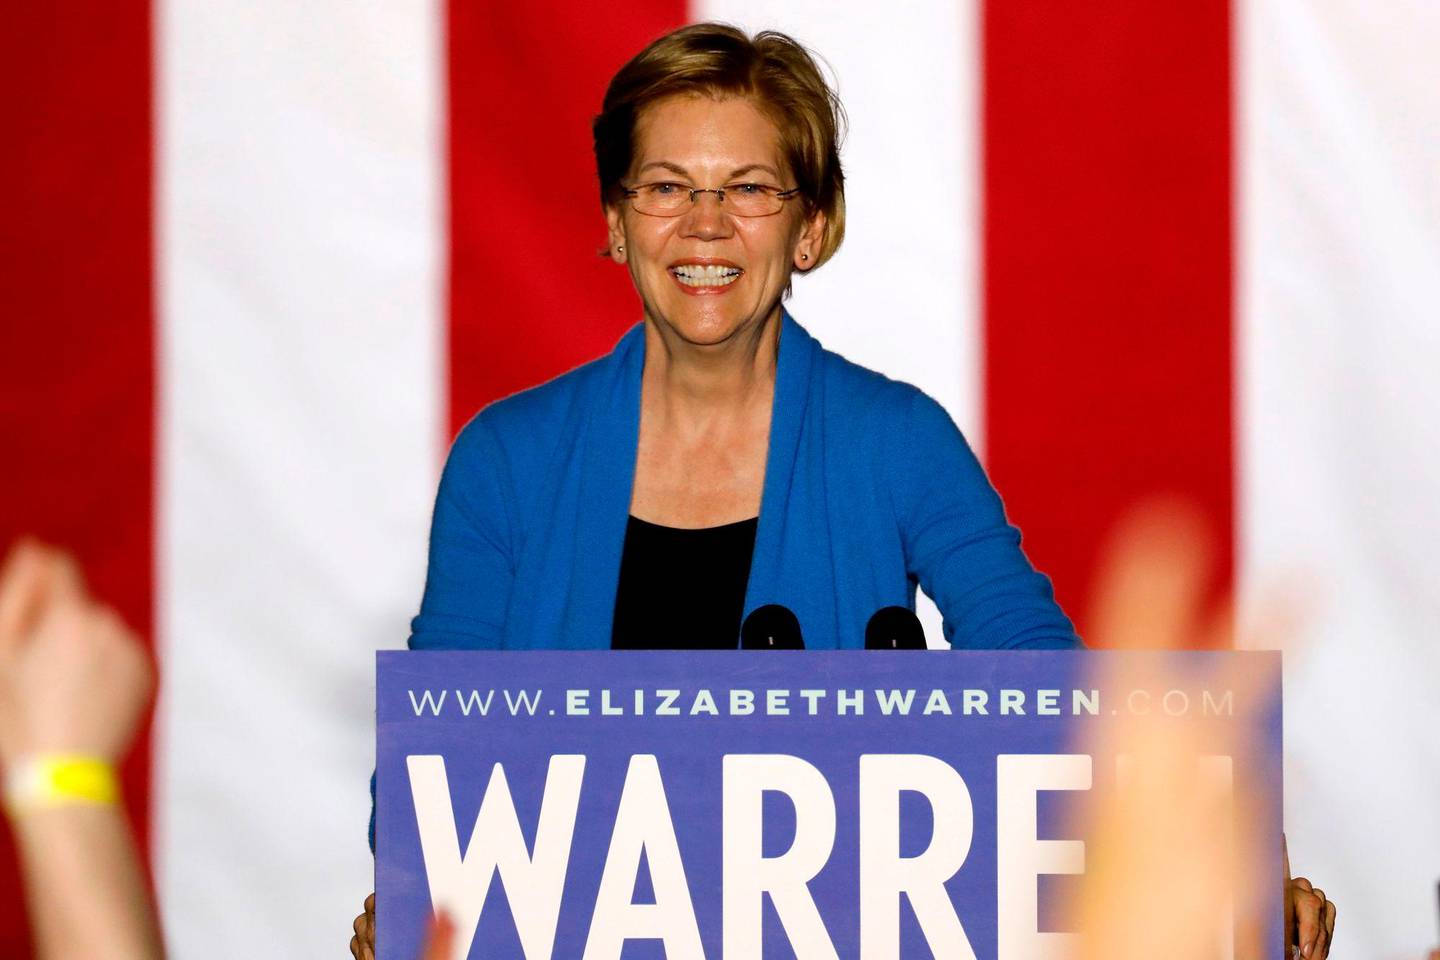 (FILES) In this file photo taken on March 03, 2020 (FILES) In this file photo Democratic presidential hopeful Massachusetts Senator Elizabeth Warren gestures as she speaks during a campaign rally at Eastern Market in Detroit, Michigan, on March 3, 2020. - Elizabeth Warren, once a frontrunner in the Democratic contest for the White House, is dropping out of the race, US media reported Thursday, following a poor showing in several statewide votes this week. Warren, a 70-year-old progressive senator from Massachusetts, will hold a call with her campaign staff Thursday and announce that she is suspending her bid for the party's presidential nomination, a source familiar with the plans told CNN. (Photo by JEFF KOWALSKY / AFP)